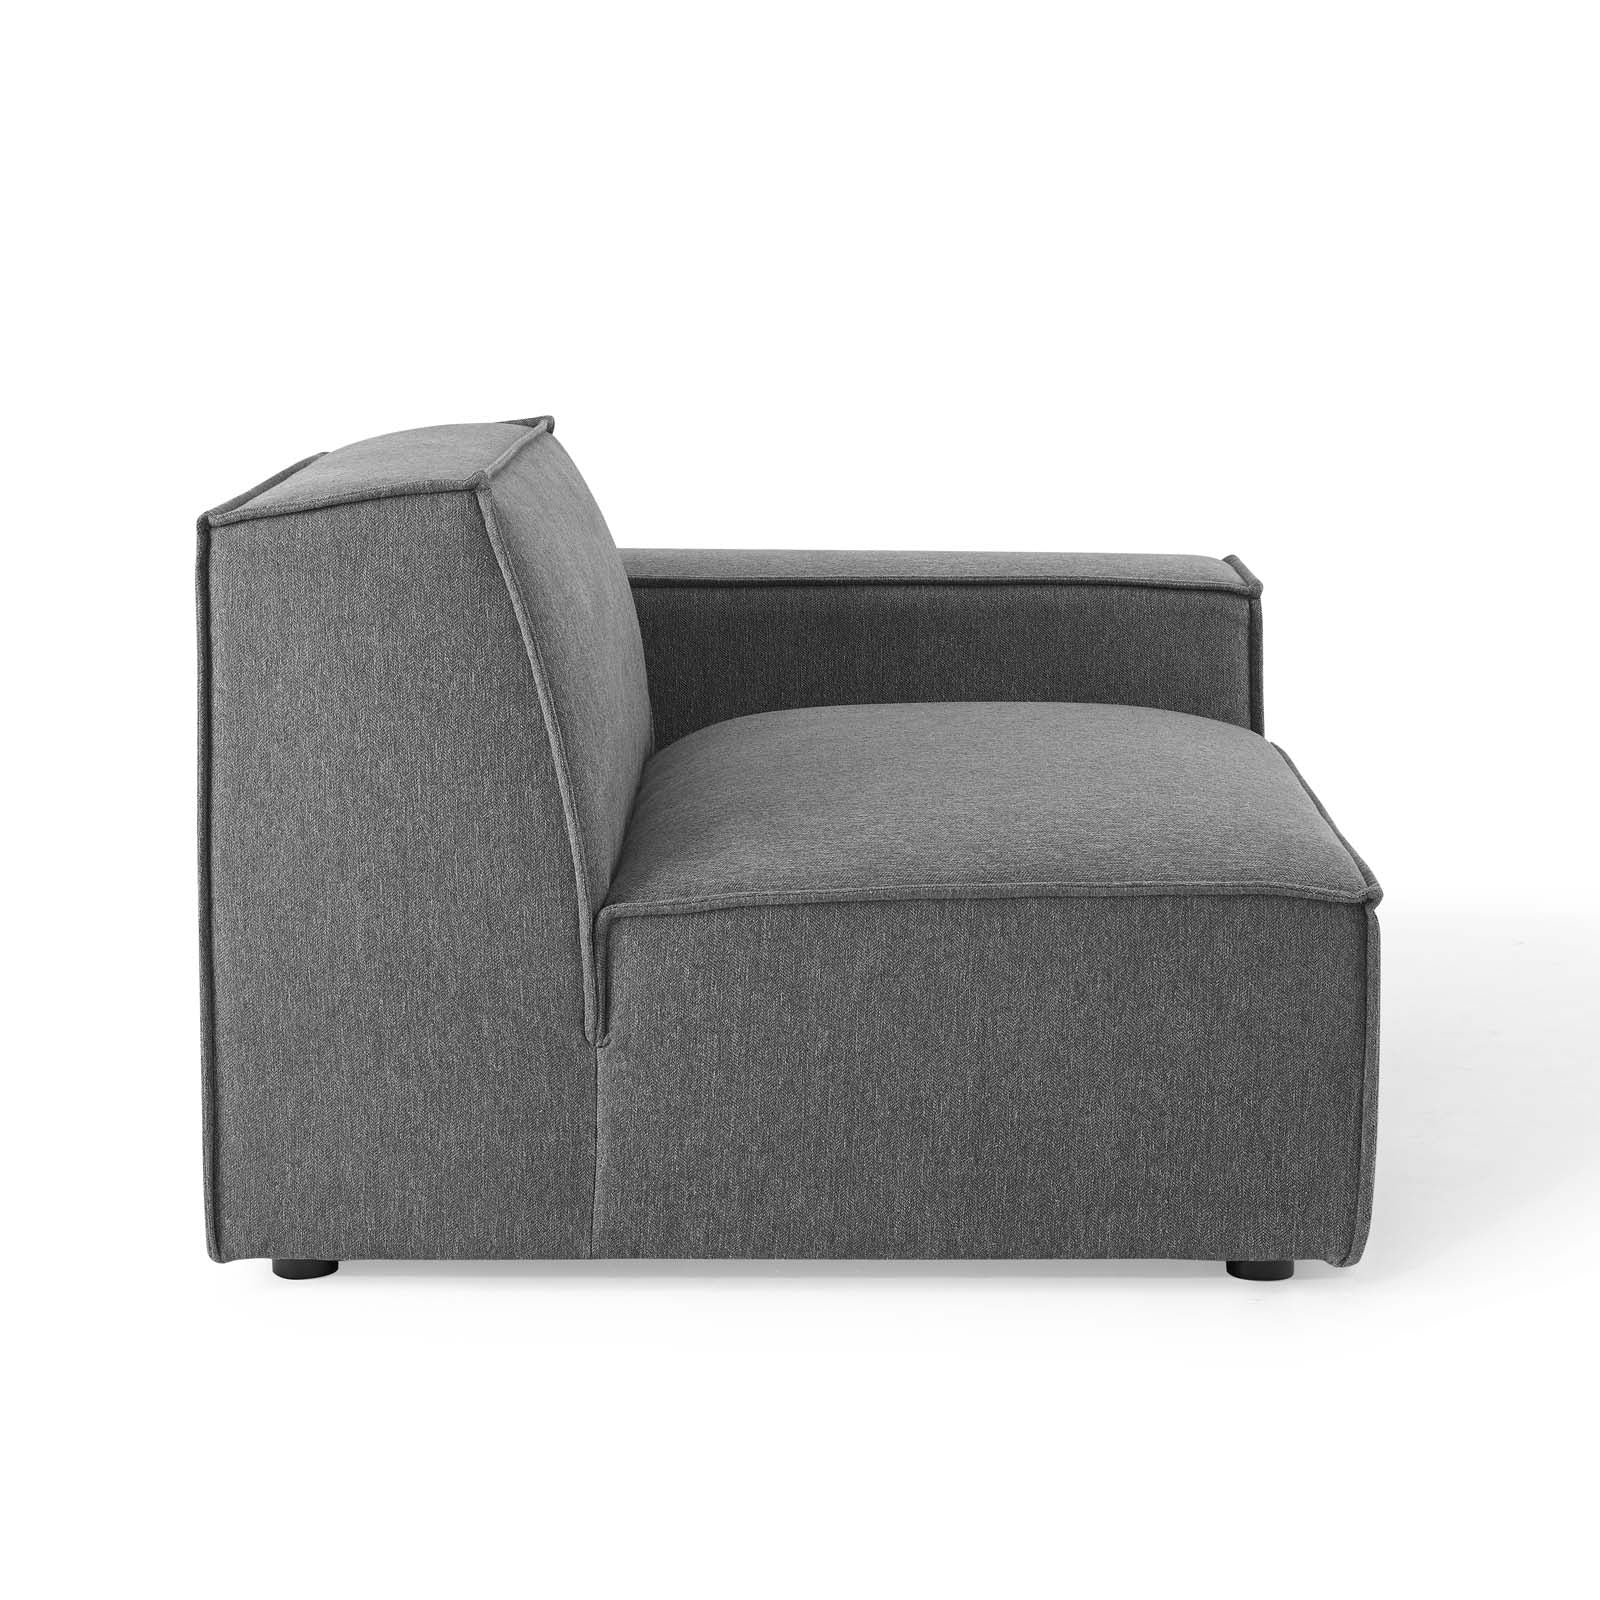 Breeze 5 Piece Extended Sectional - Charcoal